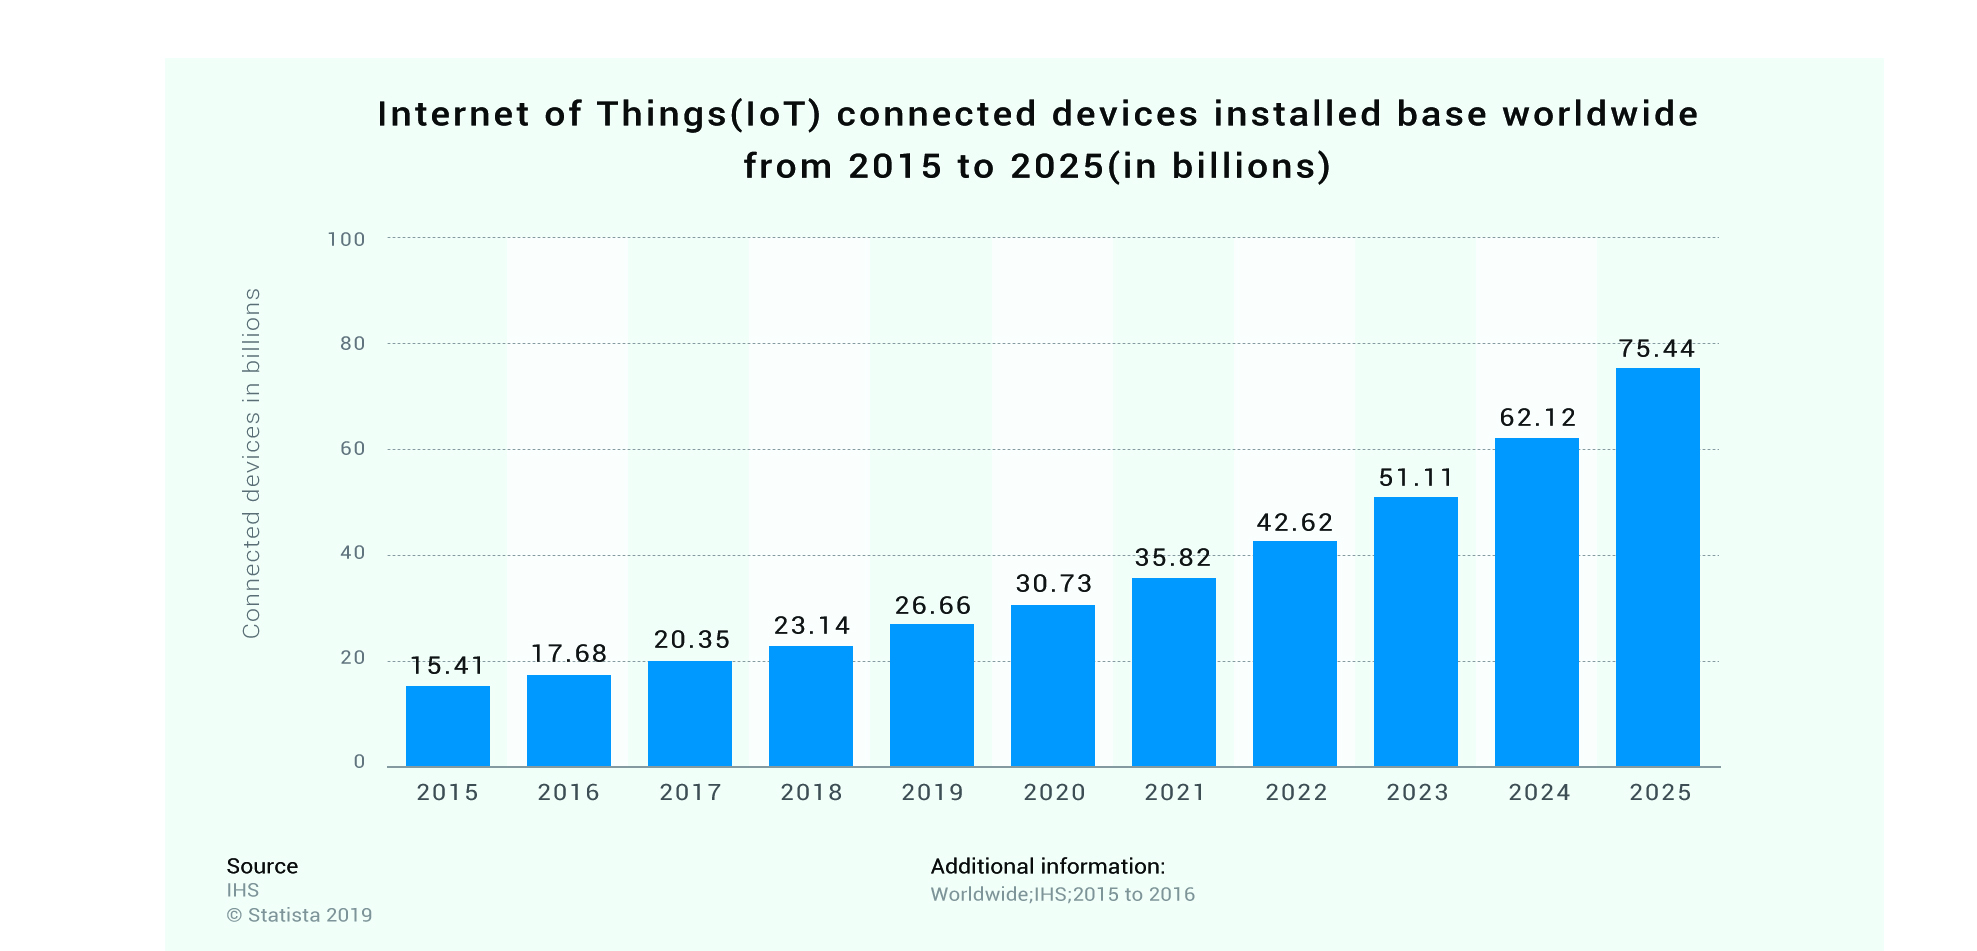 Internet of Things (IoT) connected devices installed base worldwide   from 2015 to 2025